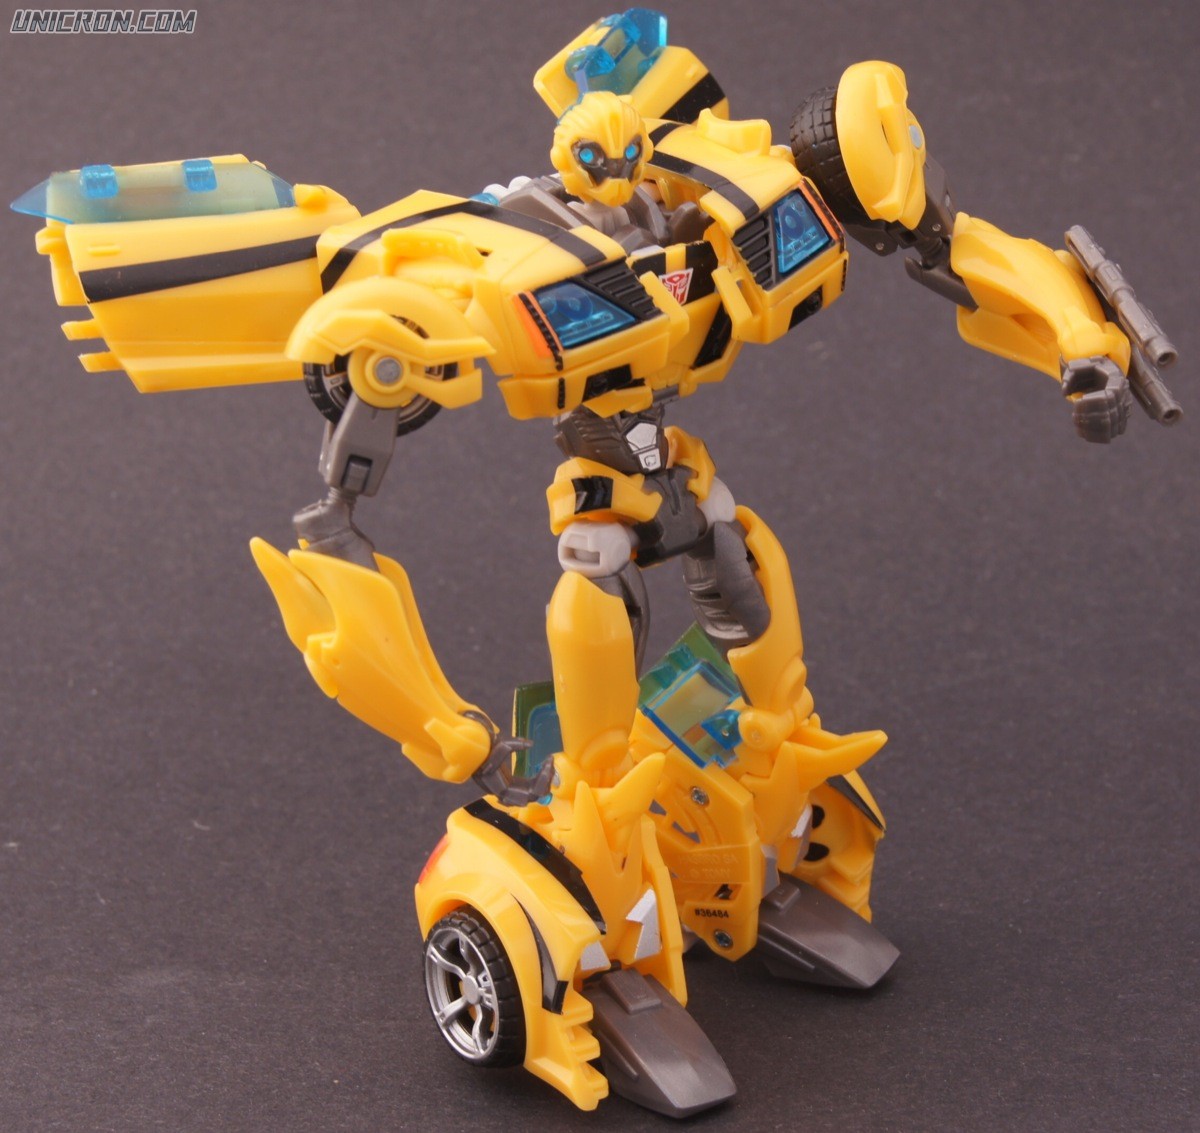 Transformers Prime First Edition Deluxe Autobot BUMBLEBEE Action Figure NEW